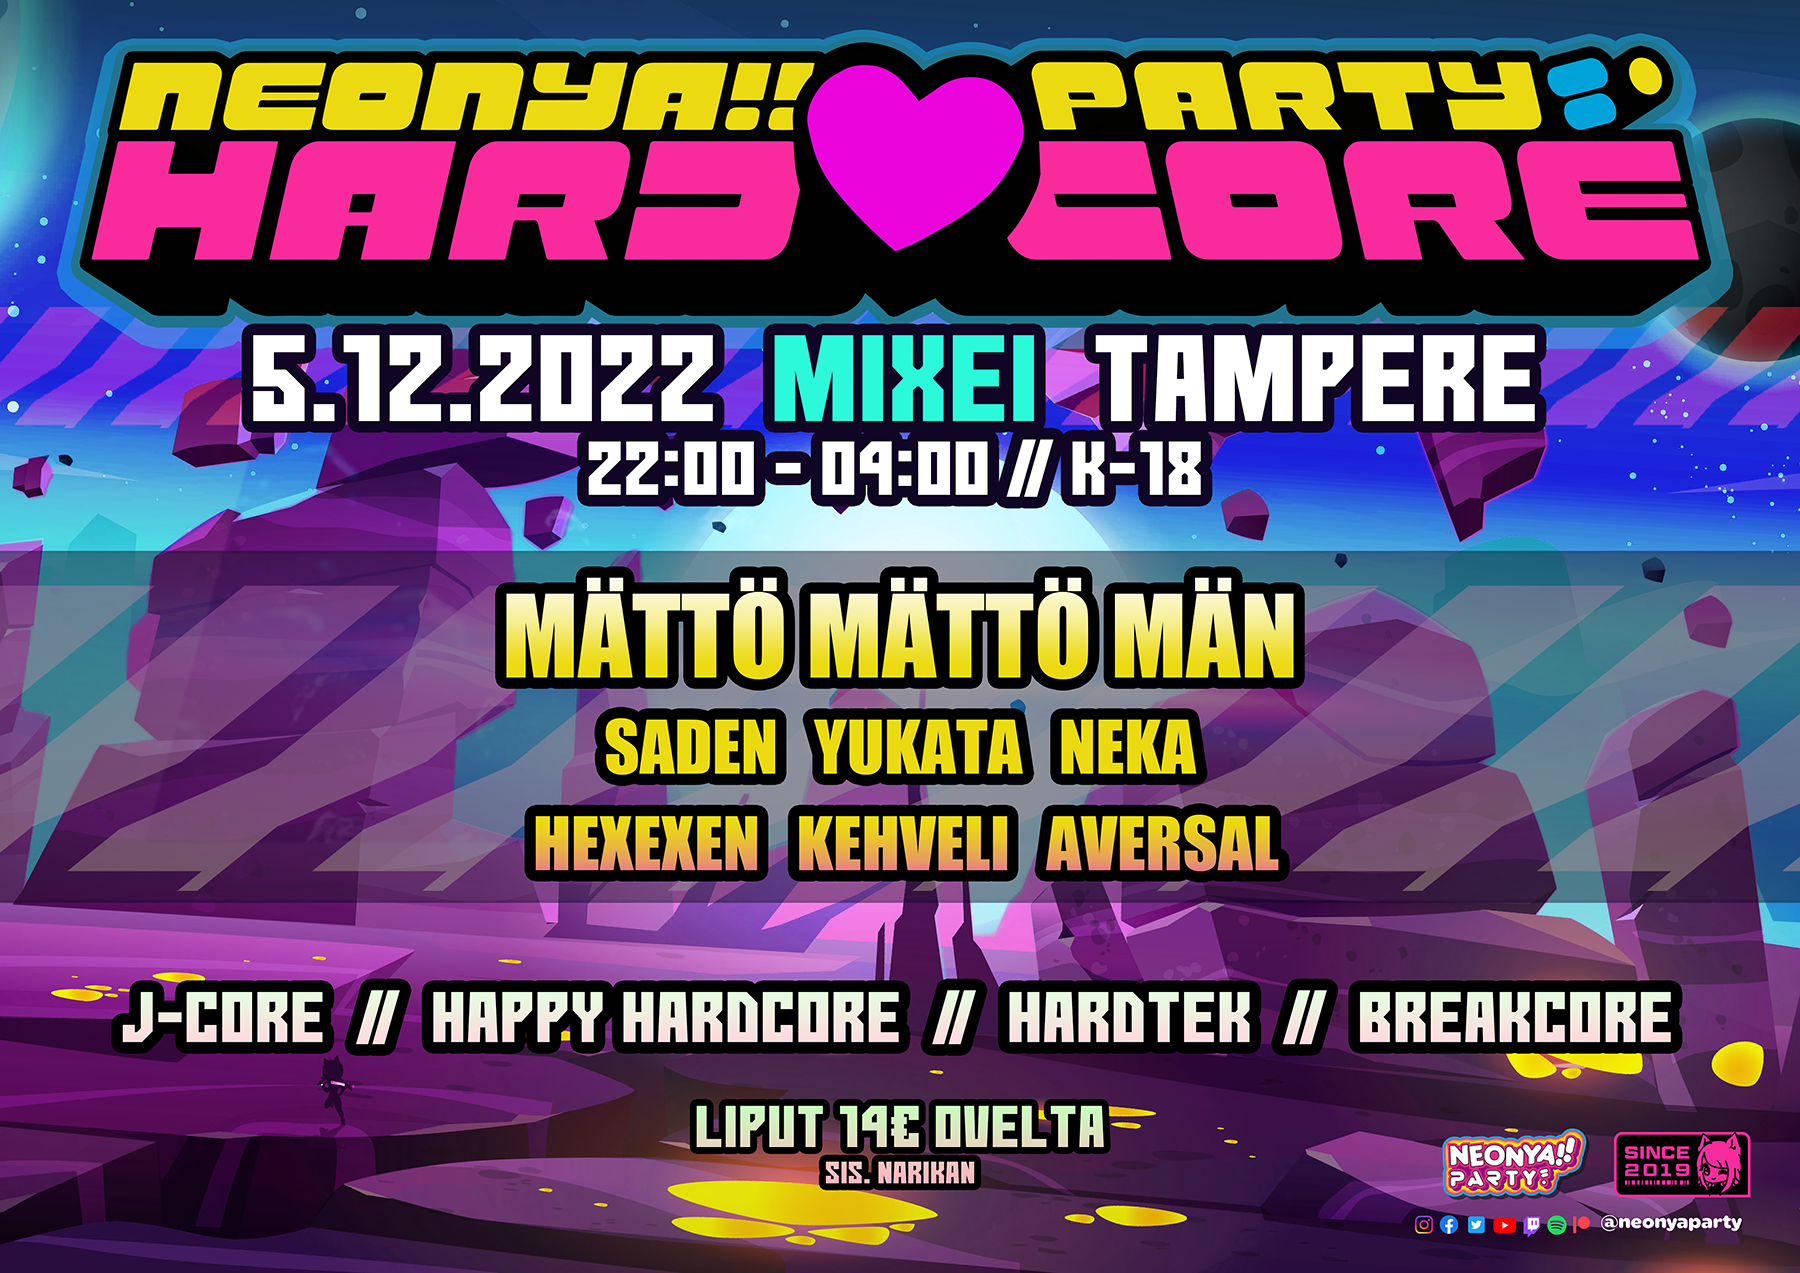 One more artist joins HARD💜CORE Tampere on December 5th!